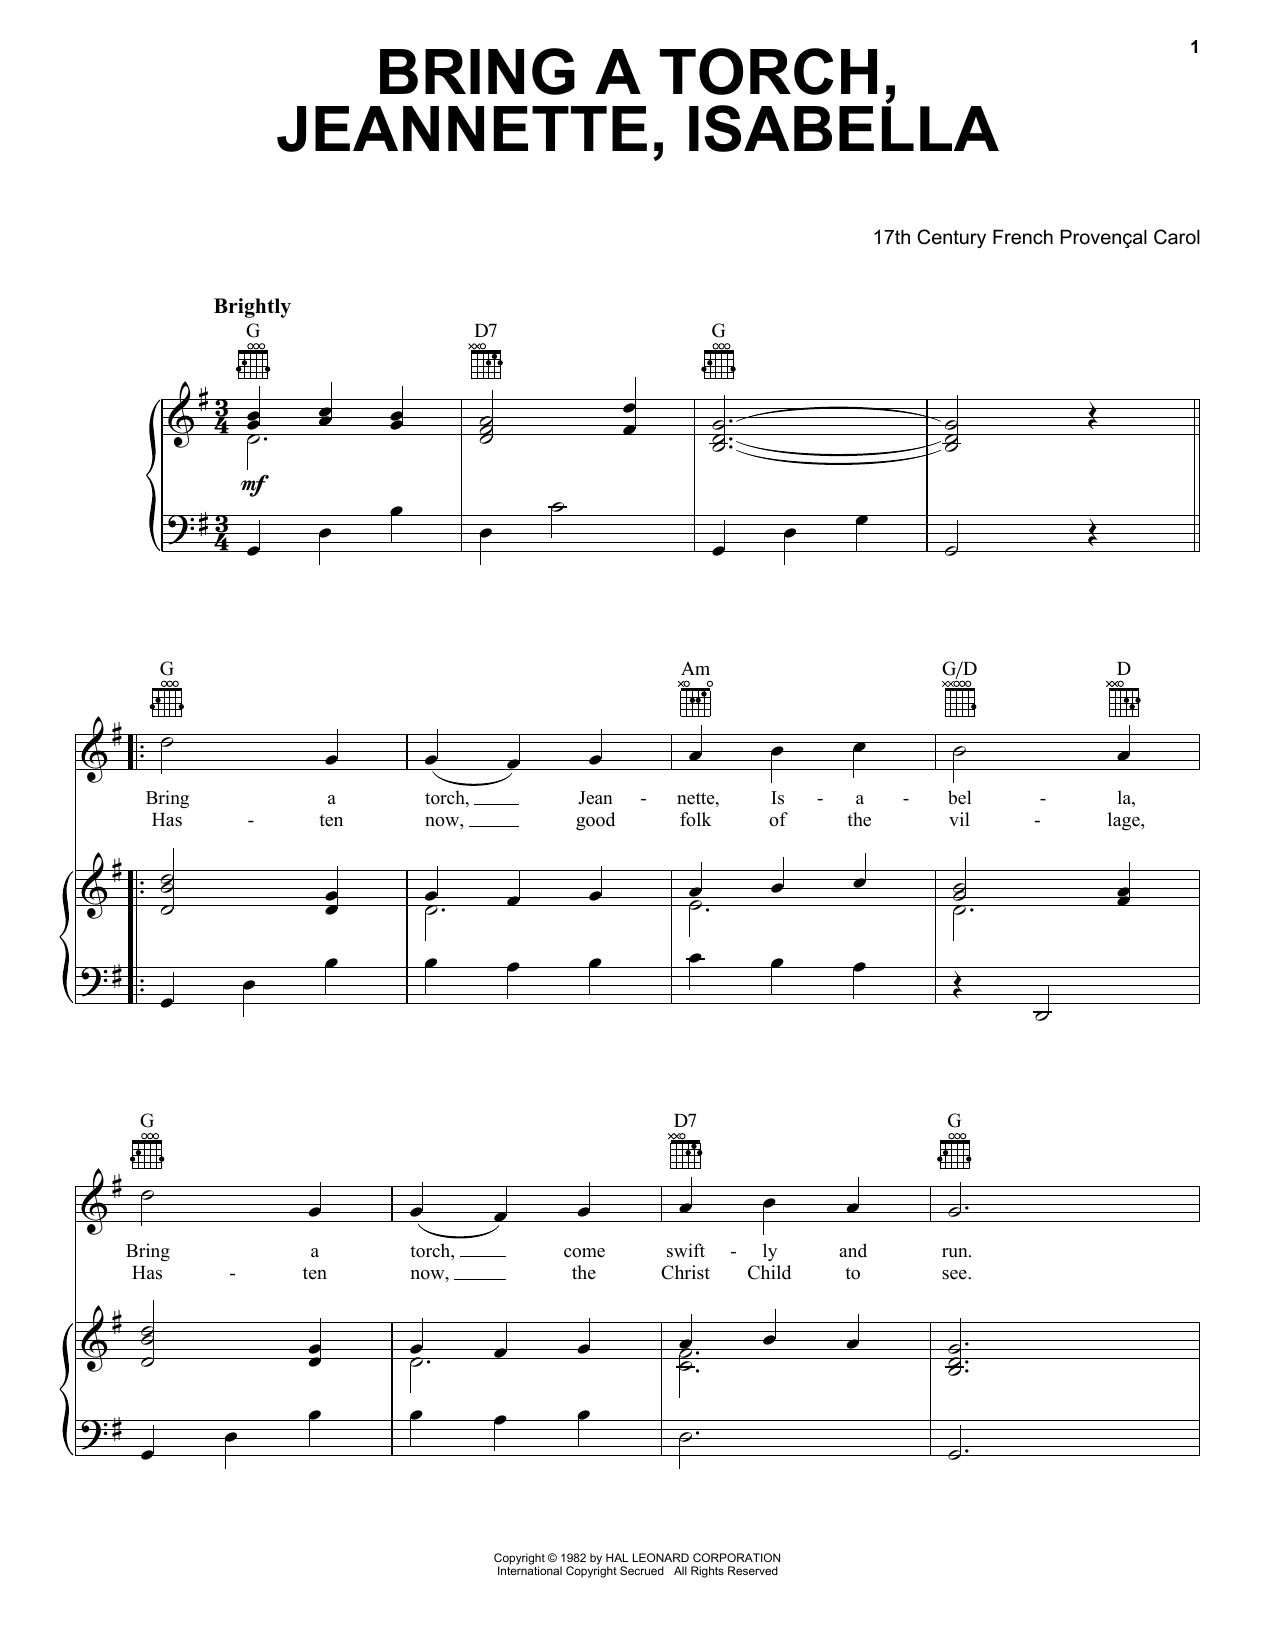 17th Century French Carol Bring A Torch, Jeannette Isabella sheet music notes and chords. Download Printable PDF.